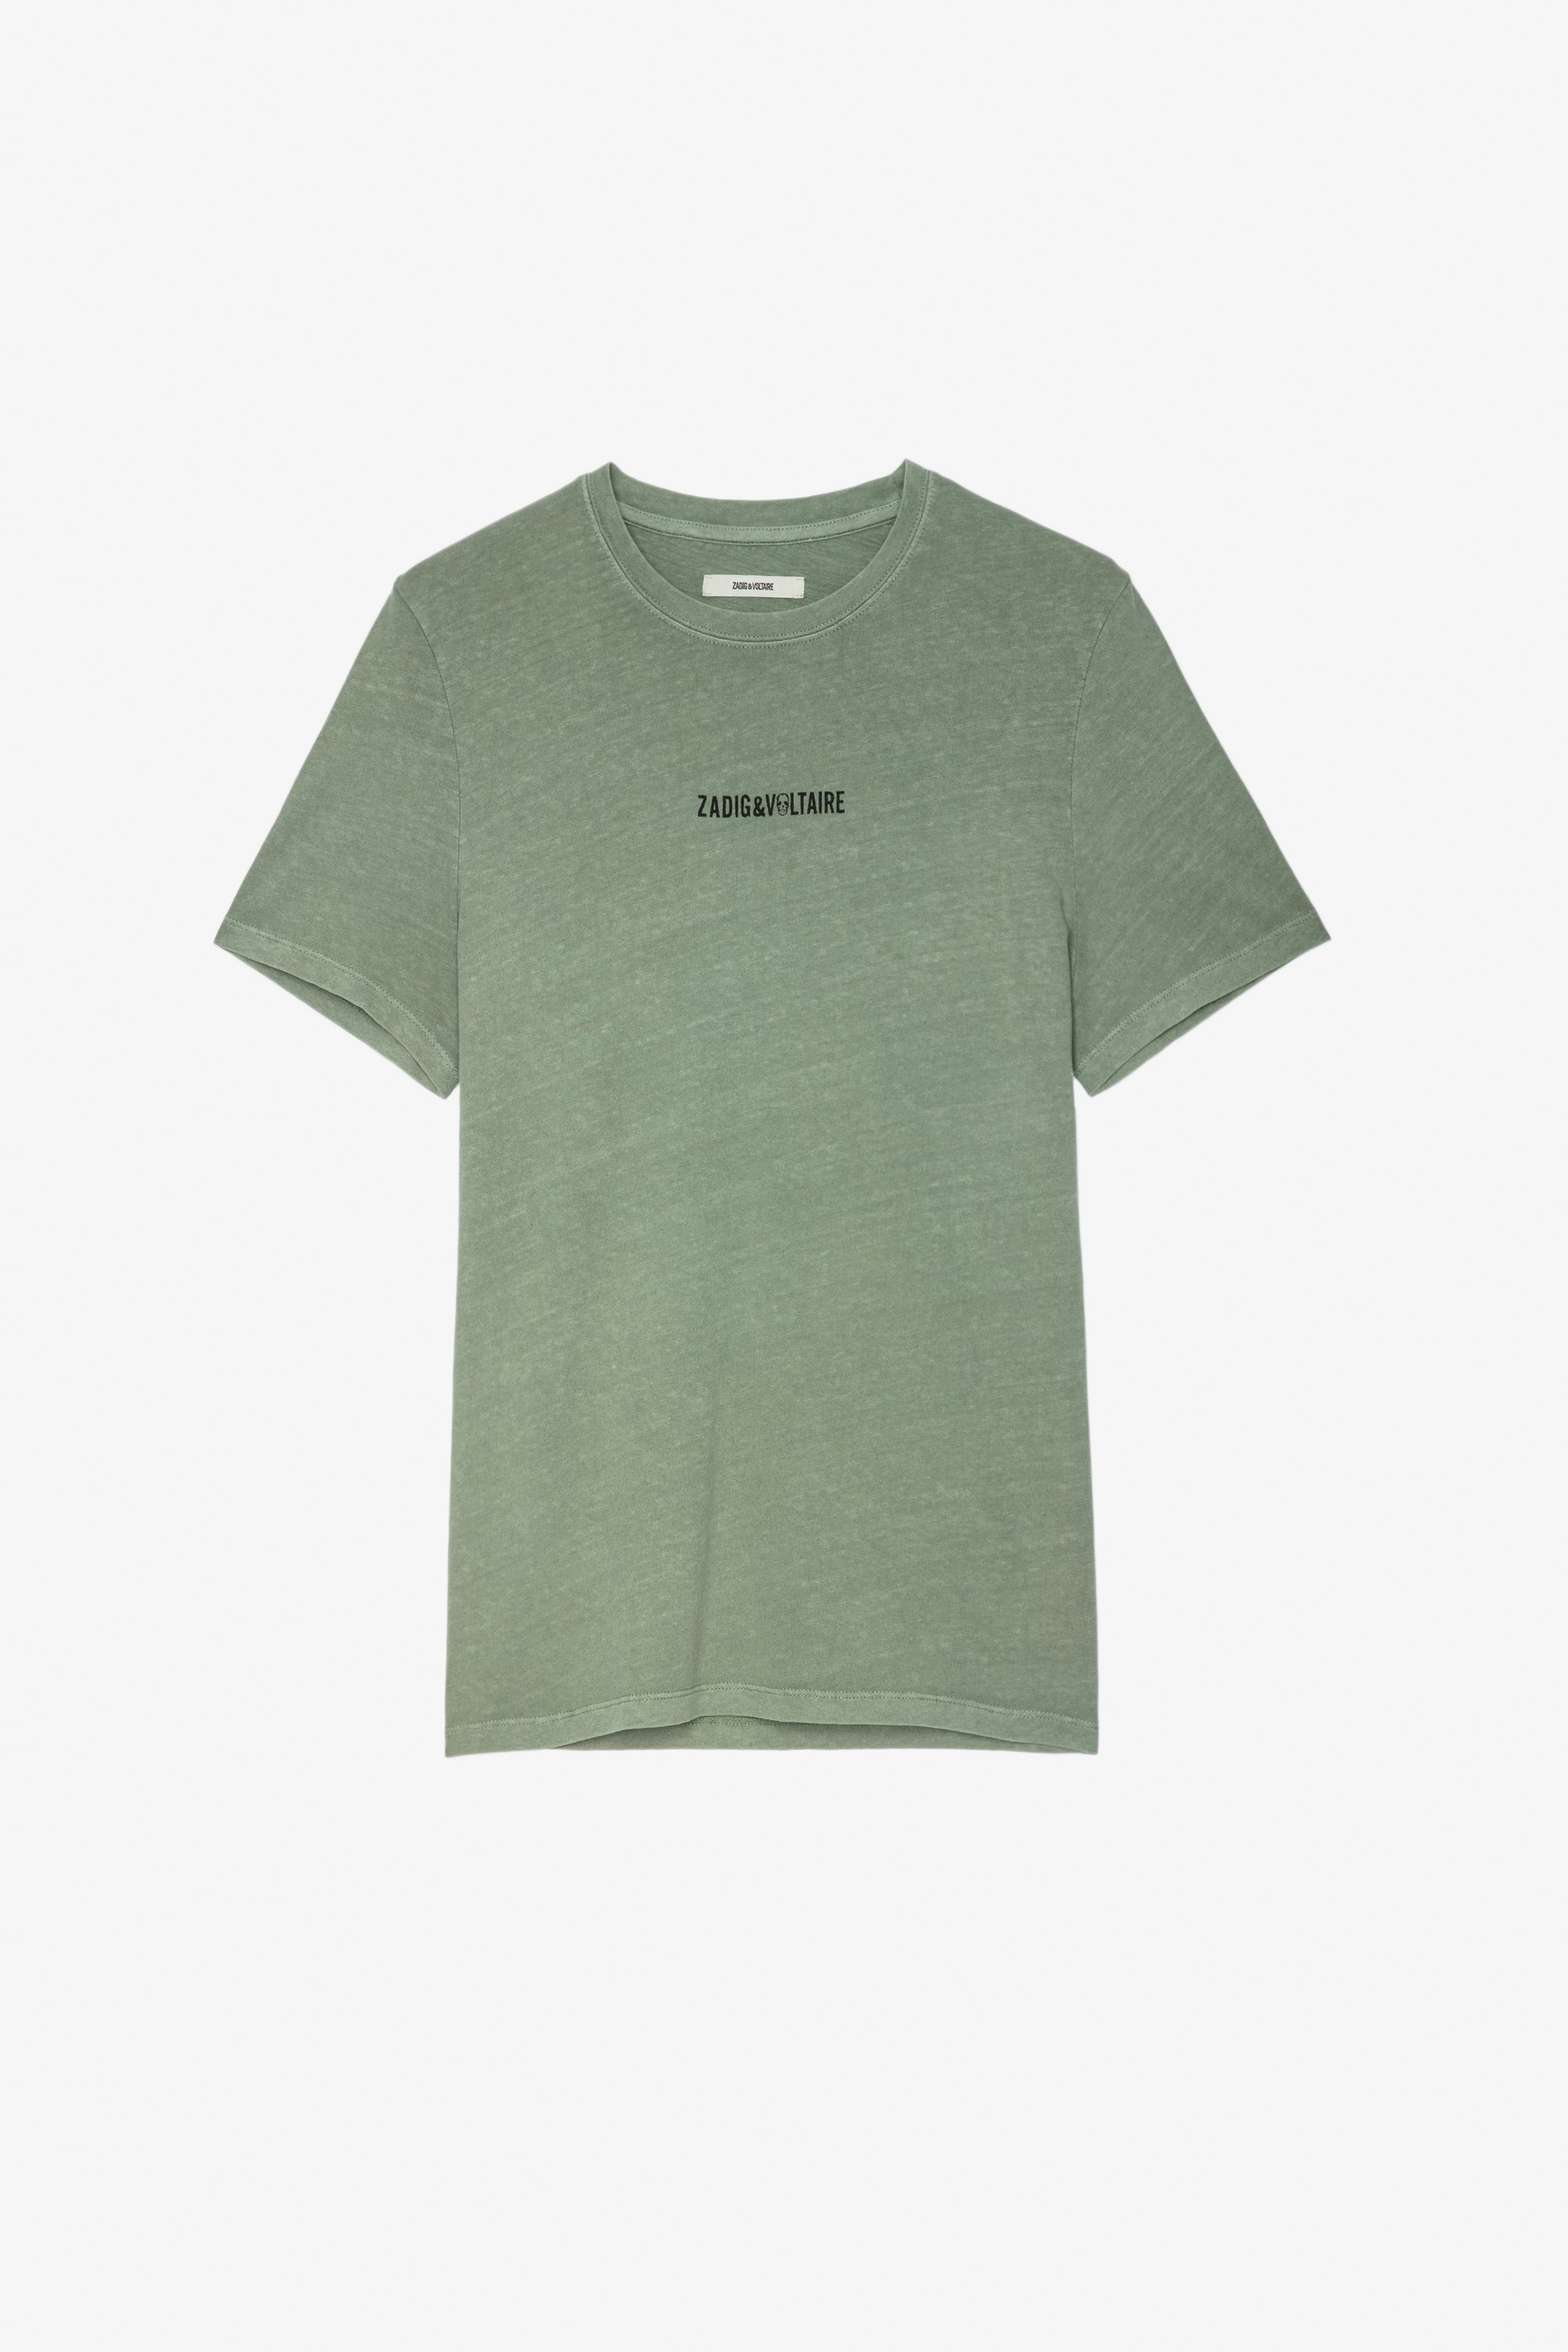 Ted T-Shirt Men’s green cotton T-shirt with ZV signature on the front and “Hédoniste” slogan on the back